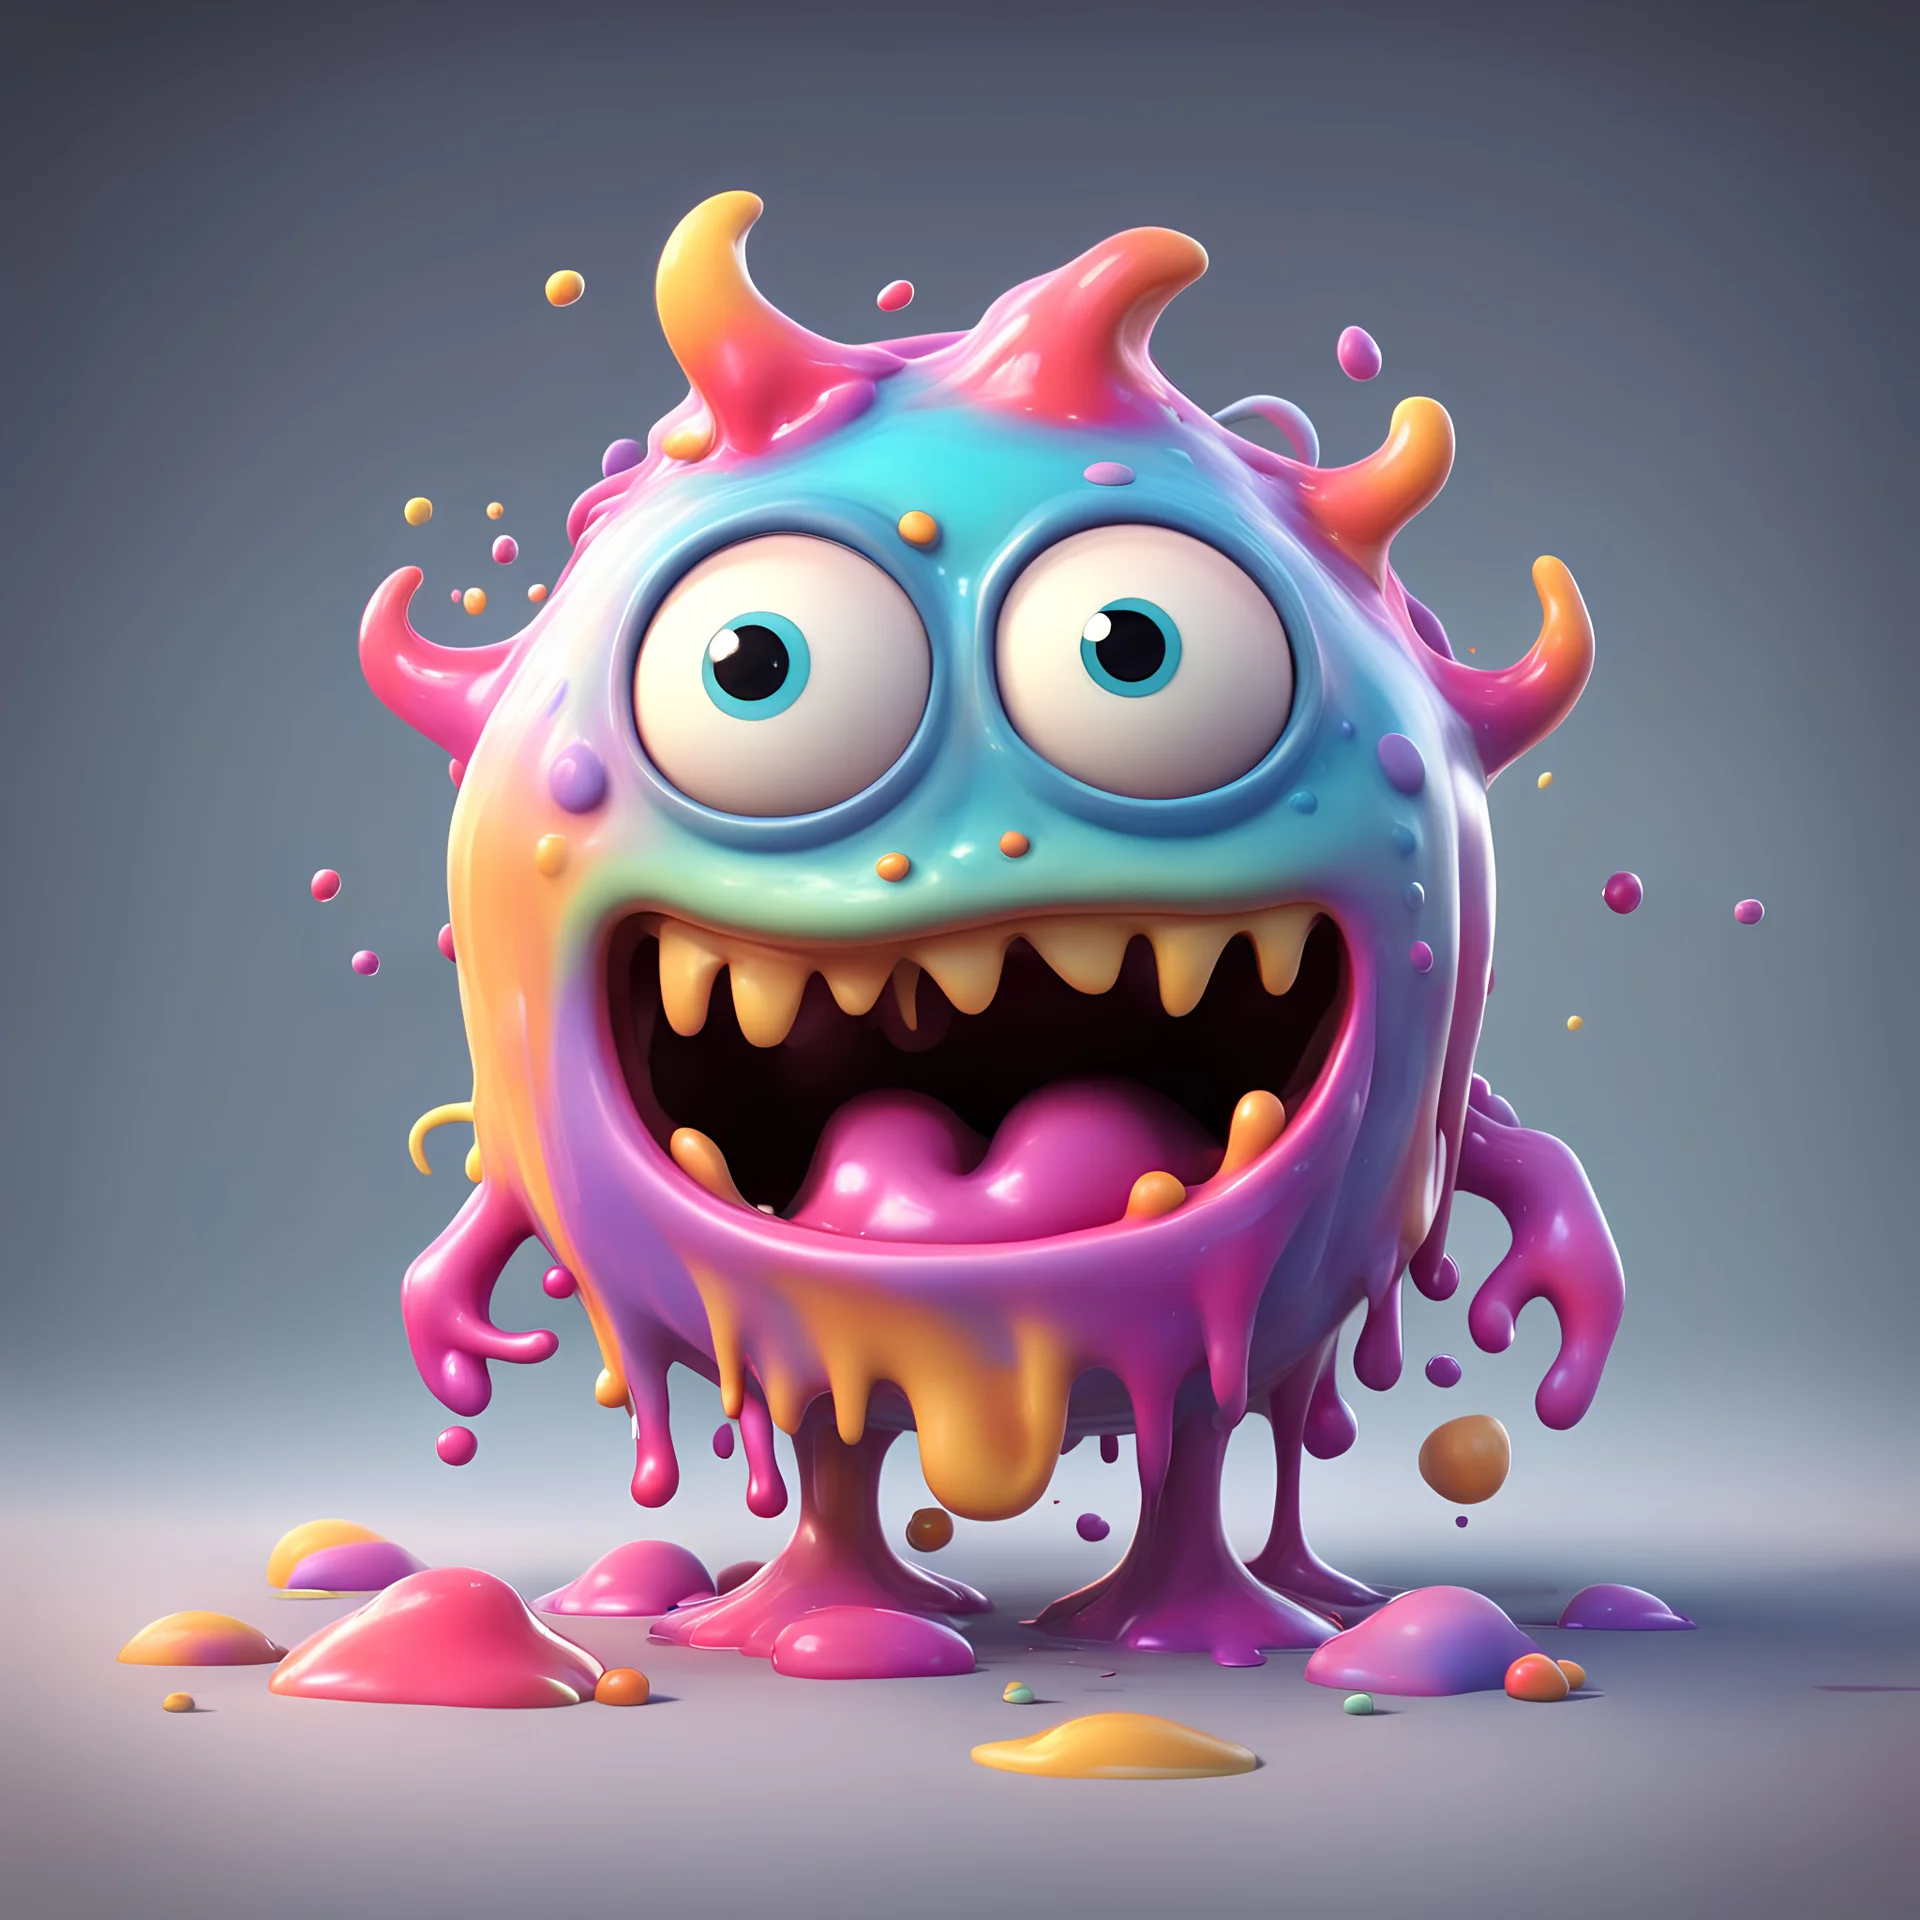 3D Pixar style animation, cute, melting monster character, (pixarstyle:1.3) whimsy character, fluid form, bonkers; jelly-like structure, amorphous, shape shifter, quirky character, playful colour spill, fun time, joyous art depicted in the style of (Buff Monster ), photorealistic CGI art, vivid colour, covered in thick gooey fun vibrant colours, 3D graffiti art, thick and glossy, topped choco balls, chocolate sprinkles, Maya modelling, Arnold rendering engine, sharp detail,16k